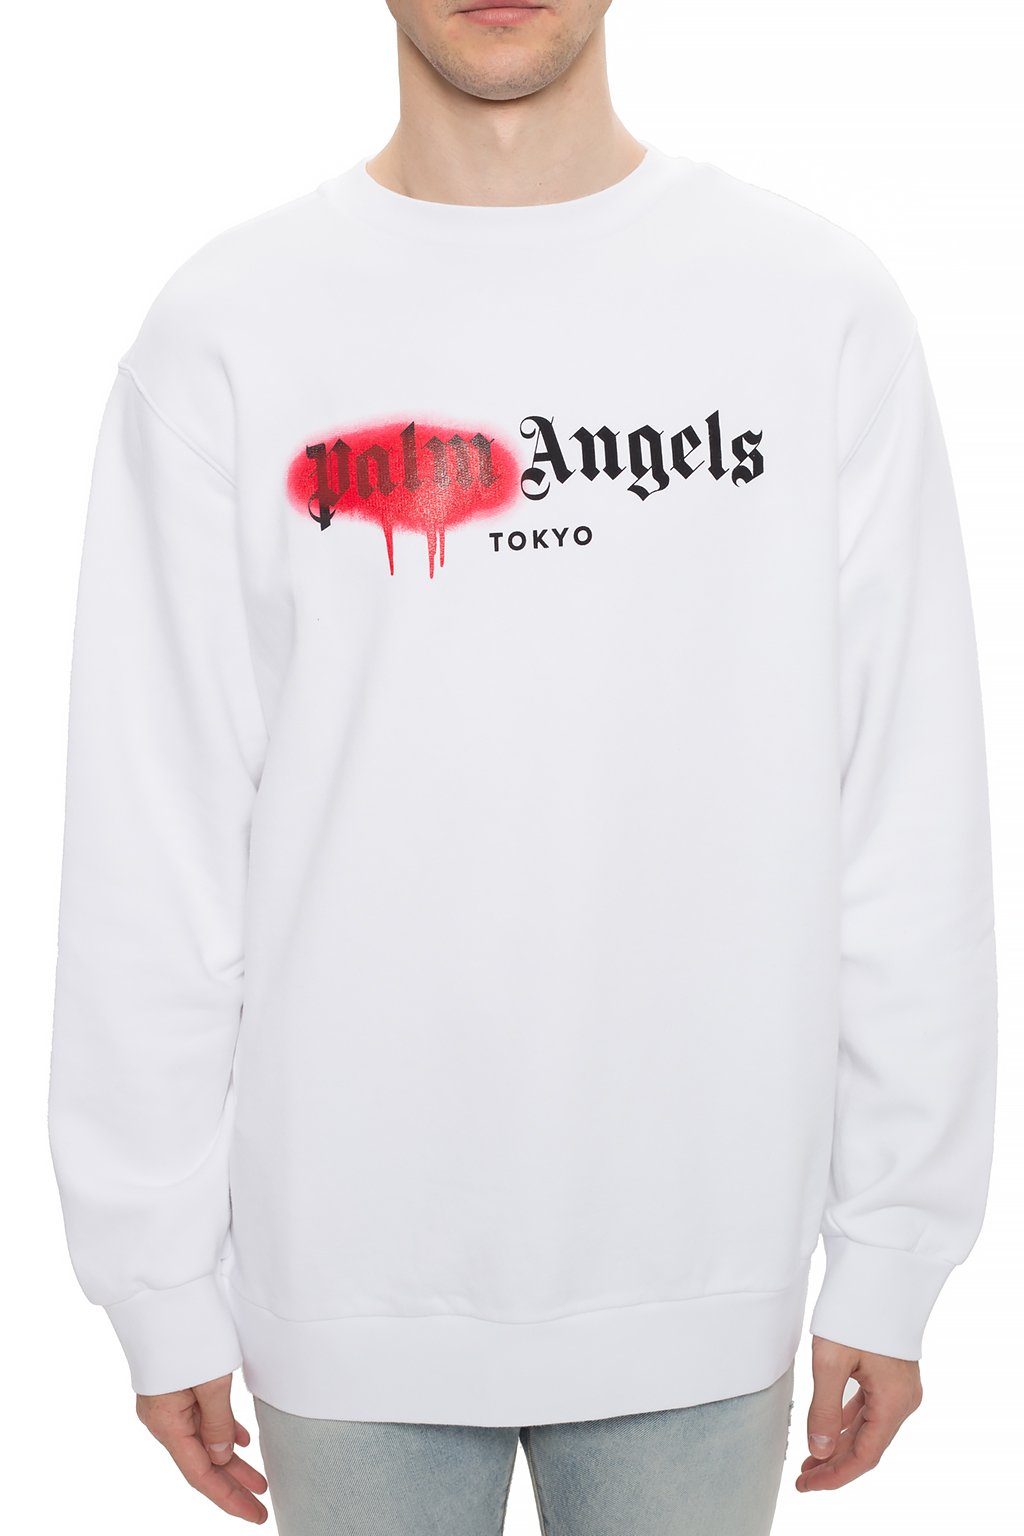 Palm Angels White Red Tokyo T-shirt